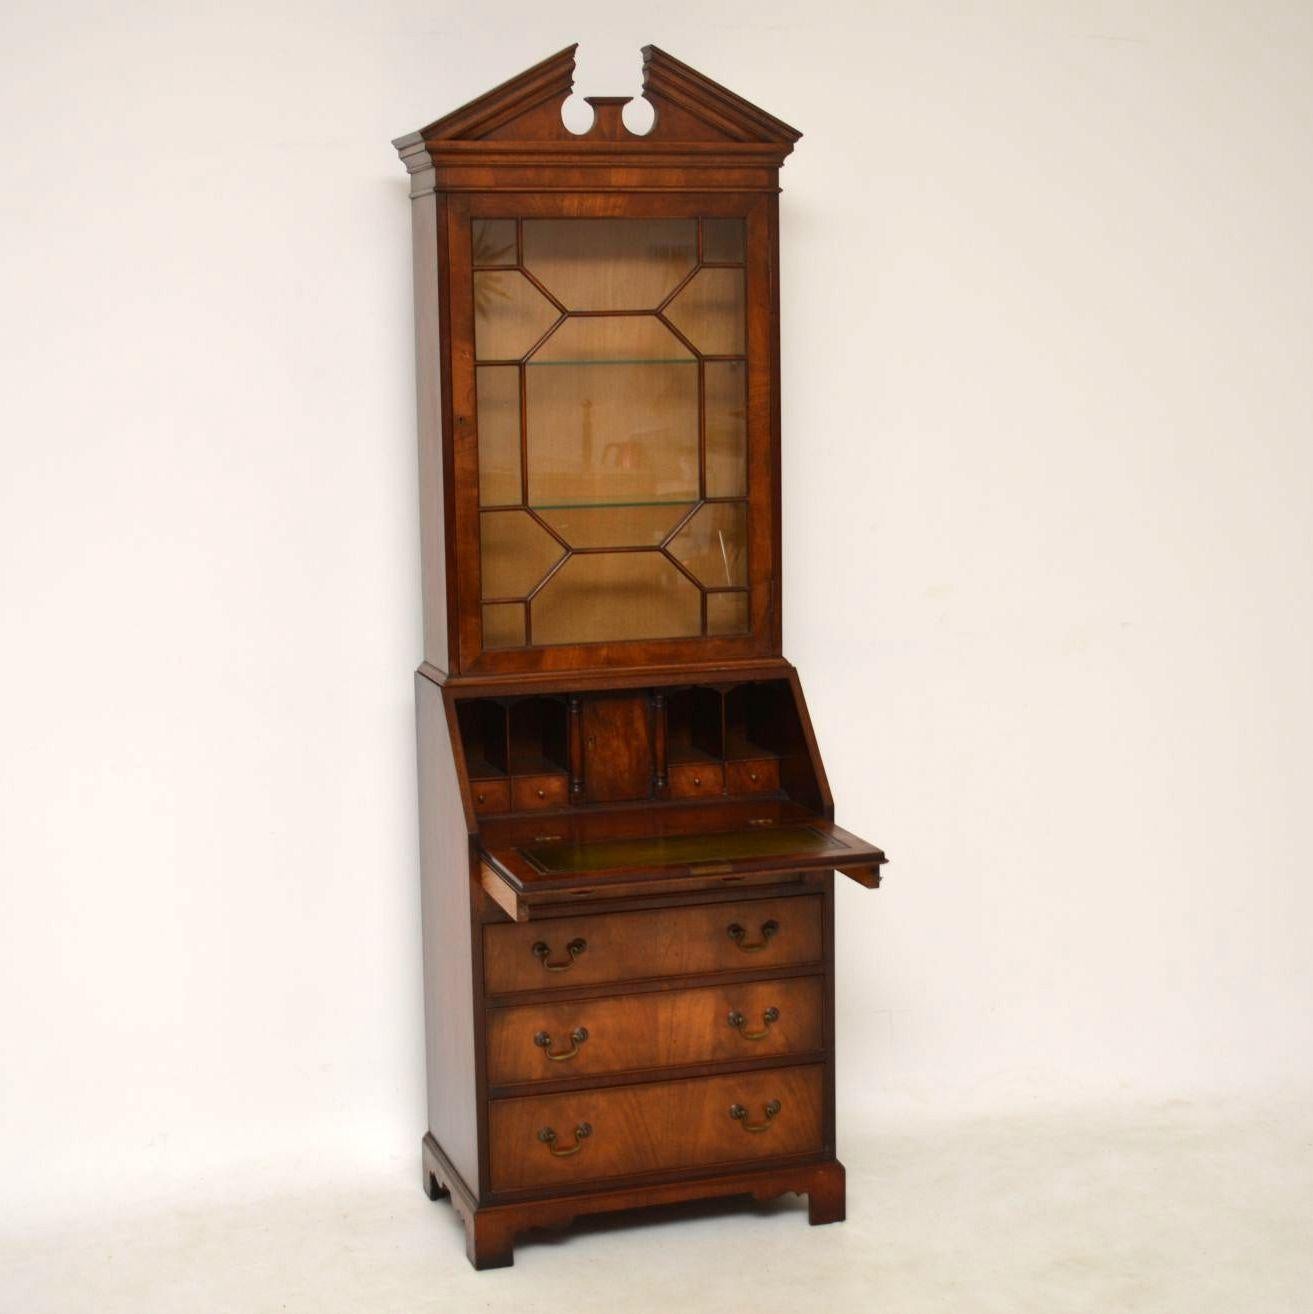 Slim antique Georgian style mahogany bureau bookcase in very good condition & dating from around the 1950's period. It has a sharp double pediment on the top & single astral glazed door below with two glass shelves inside. The fall front is flame